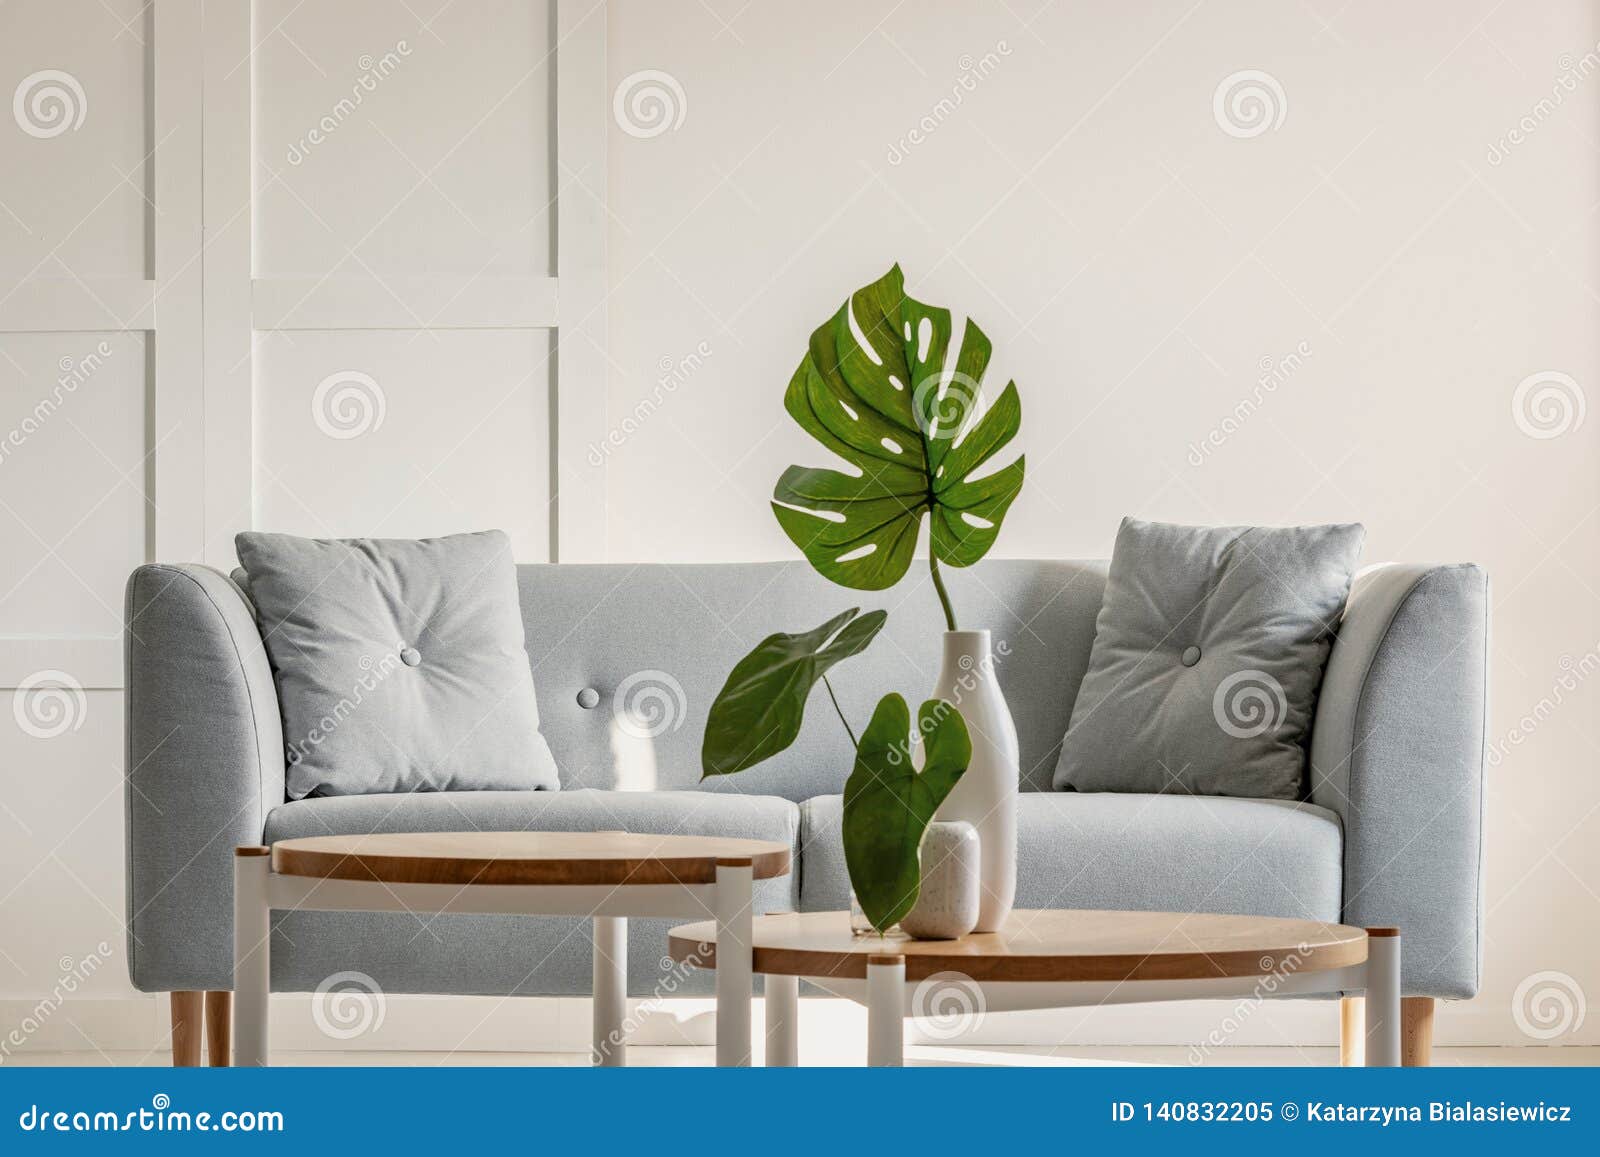 monstera deliciosa on coffee table and grey sofa in a simple living room interior